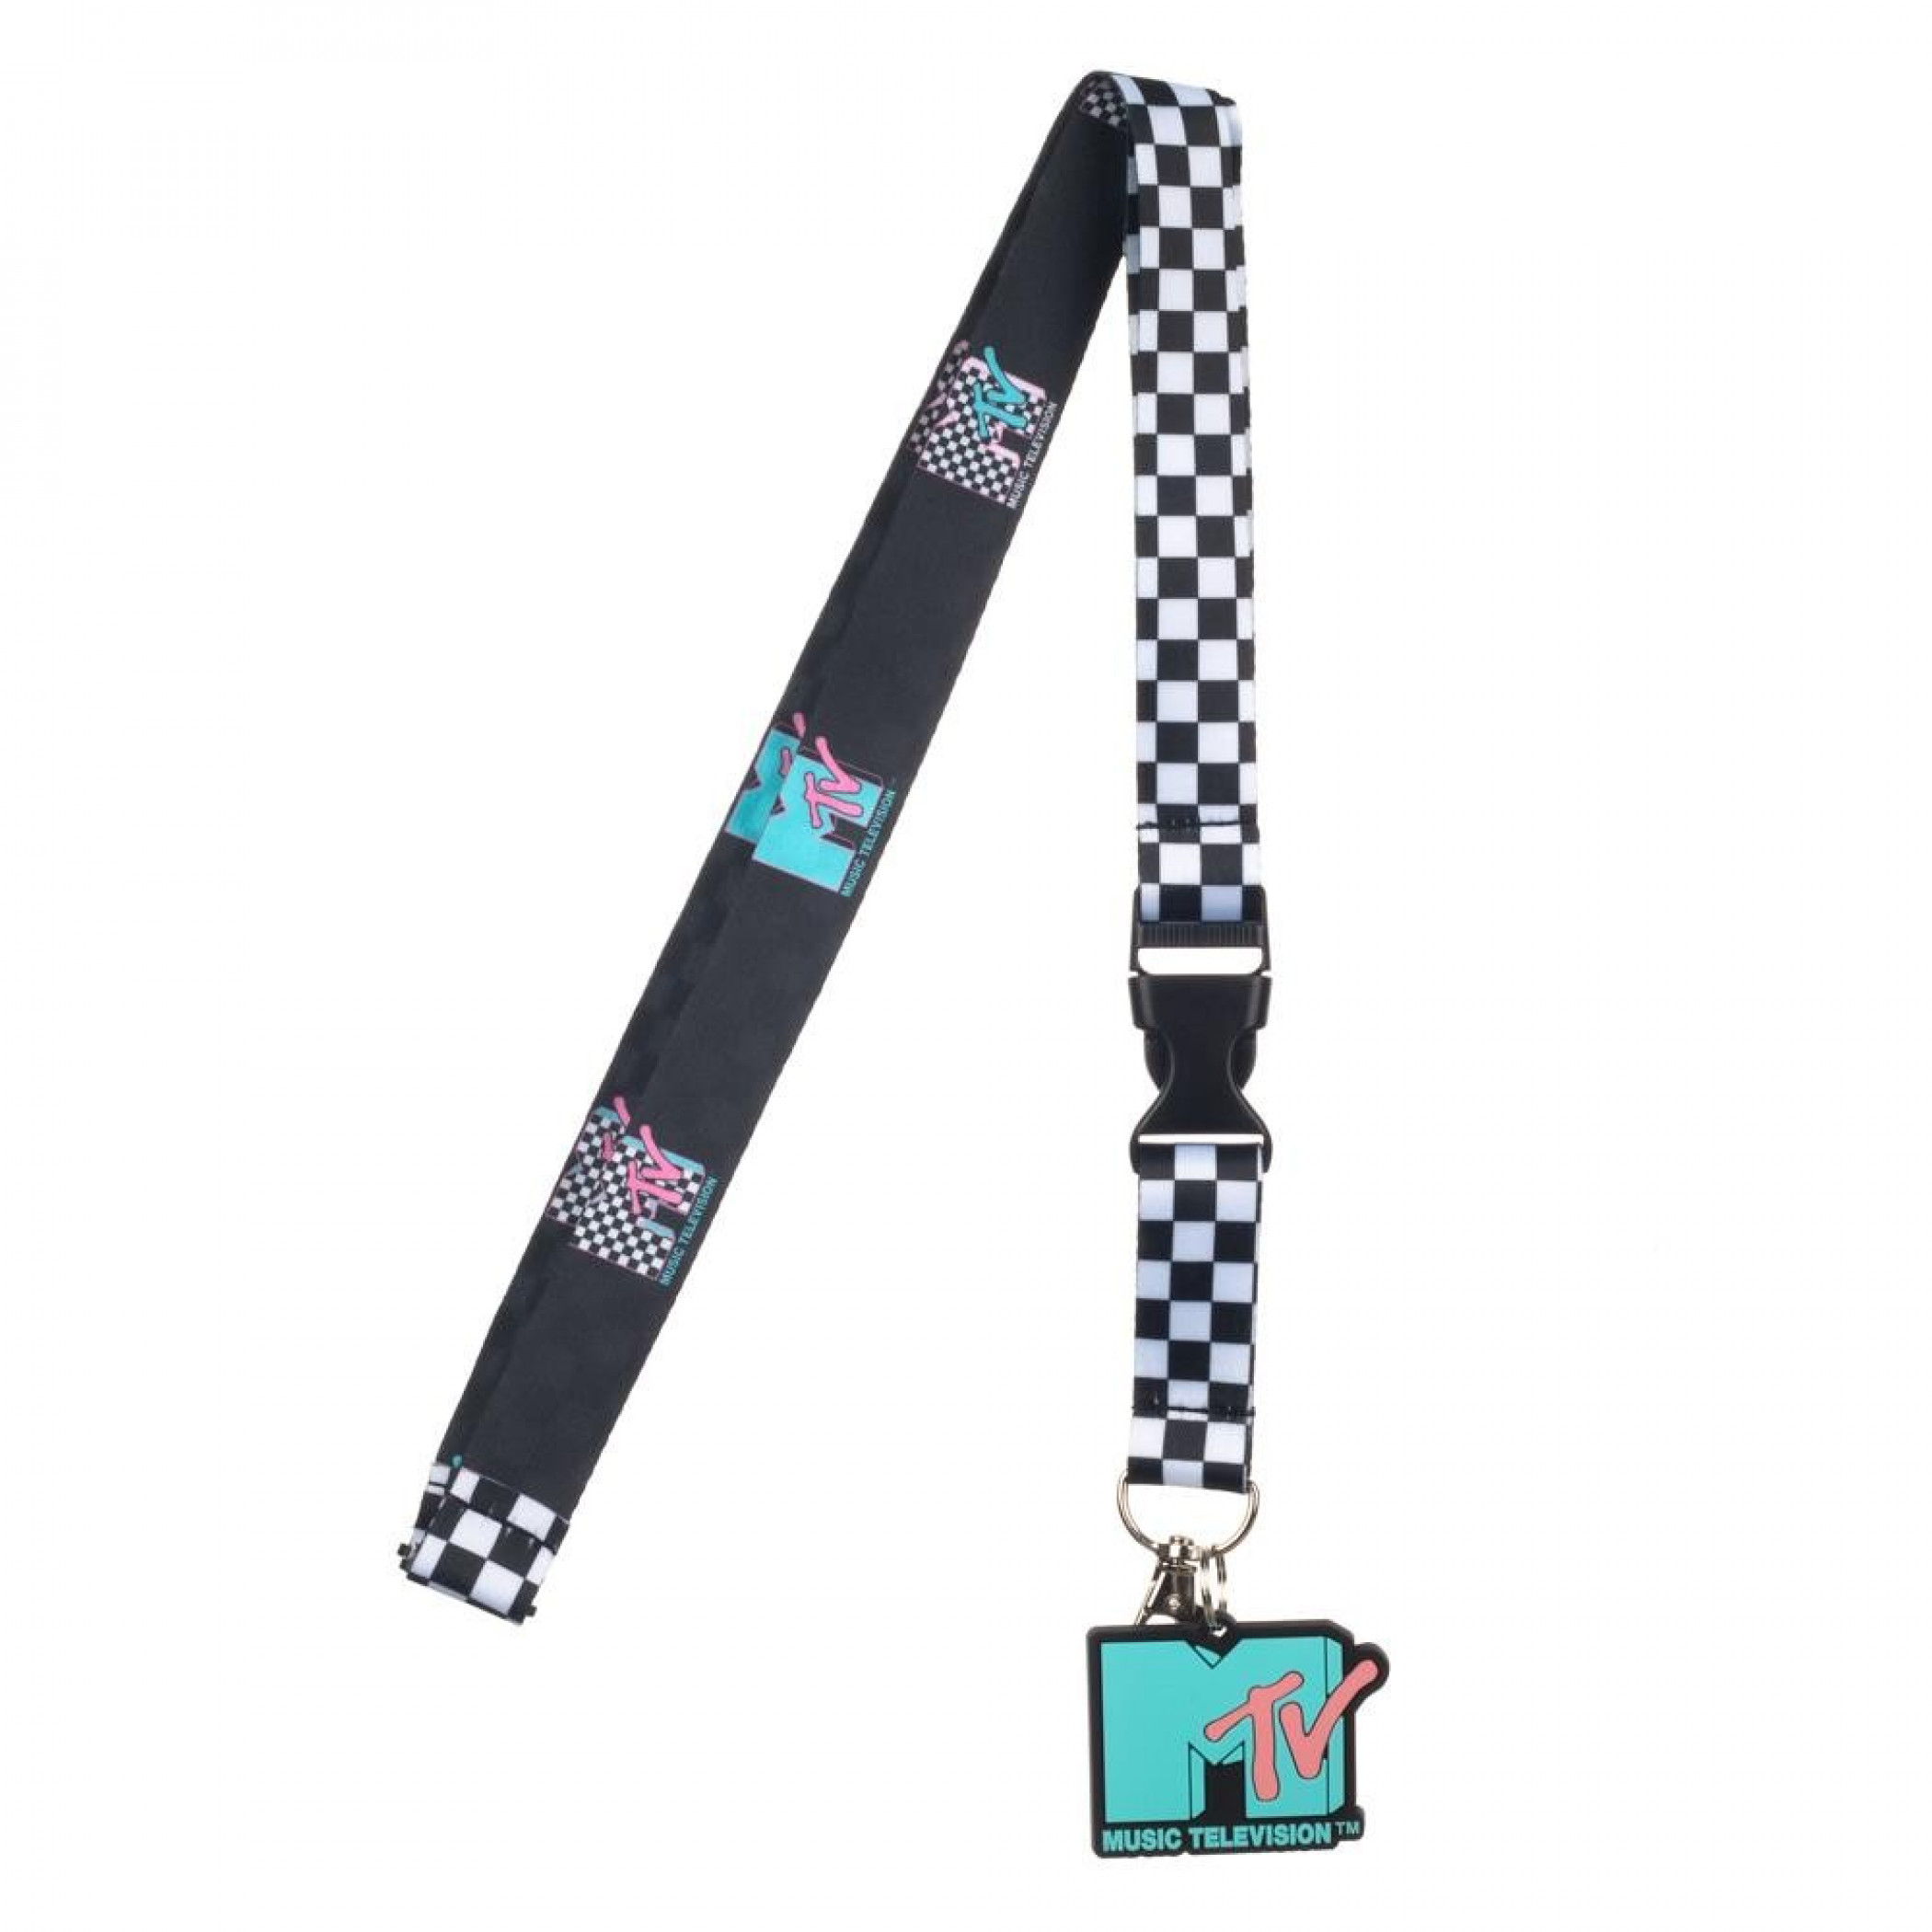 MTV Repeating Pattern Lanyard with Charm and Sticker